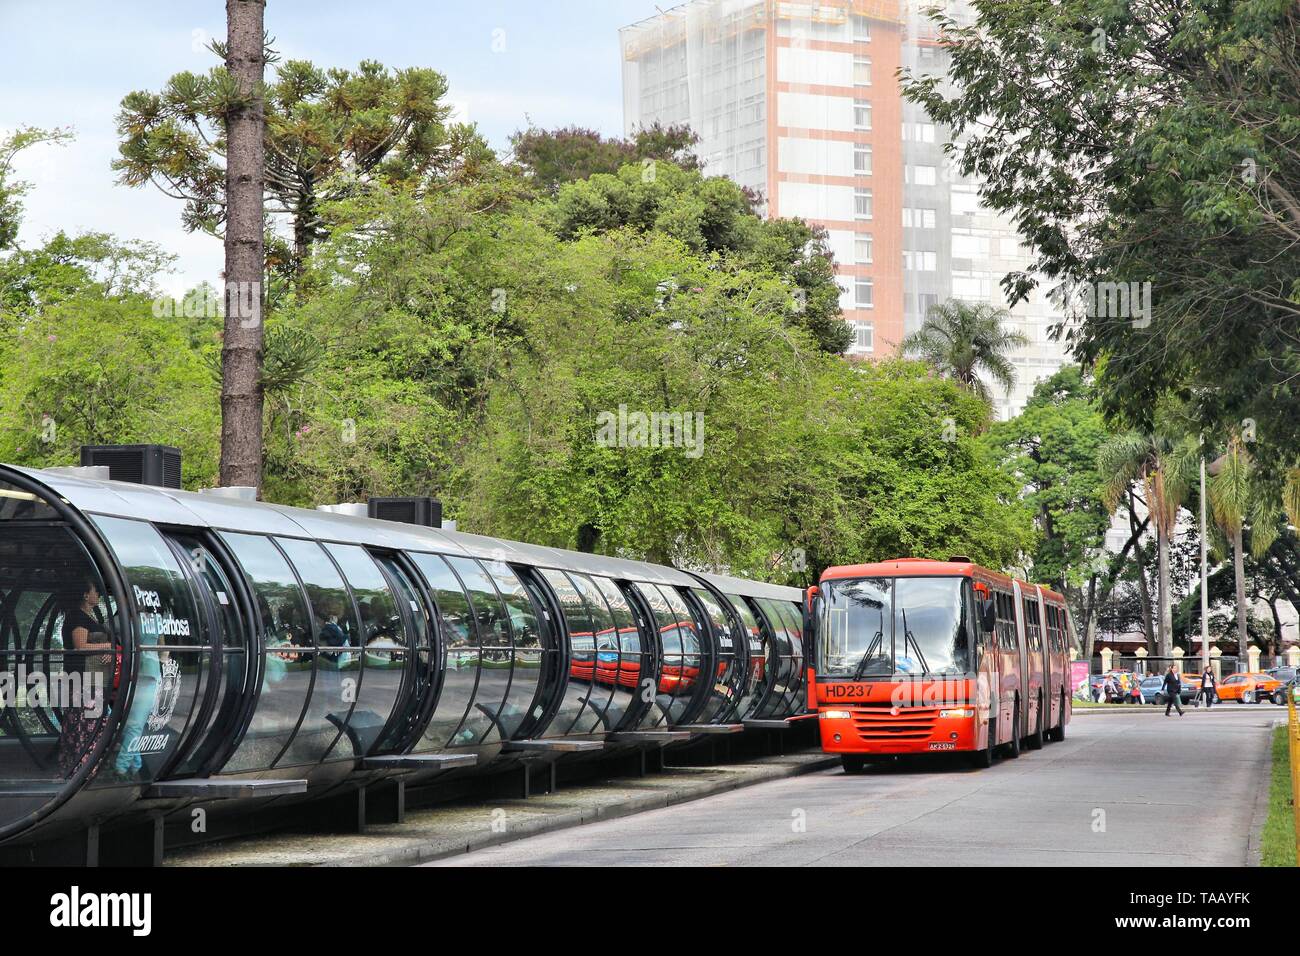 CURITIBA, BRAZIL - OCTOBER 7, 2014: People ride city bus in Curitiba, Brazil. Curitiba's bus system is world famous for its efficiency. Founded in 197 Stock Photo